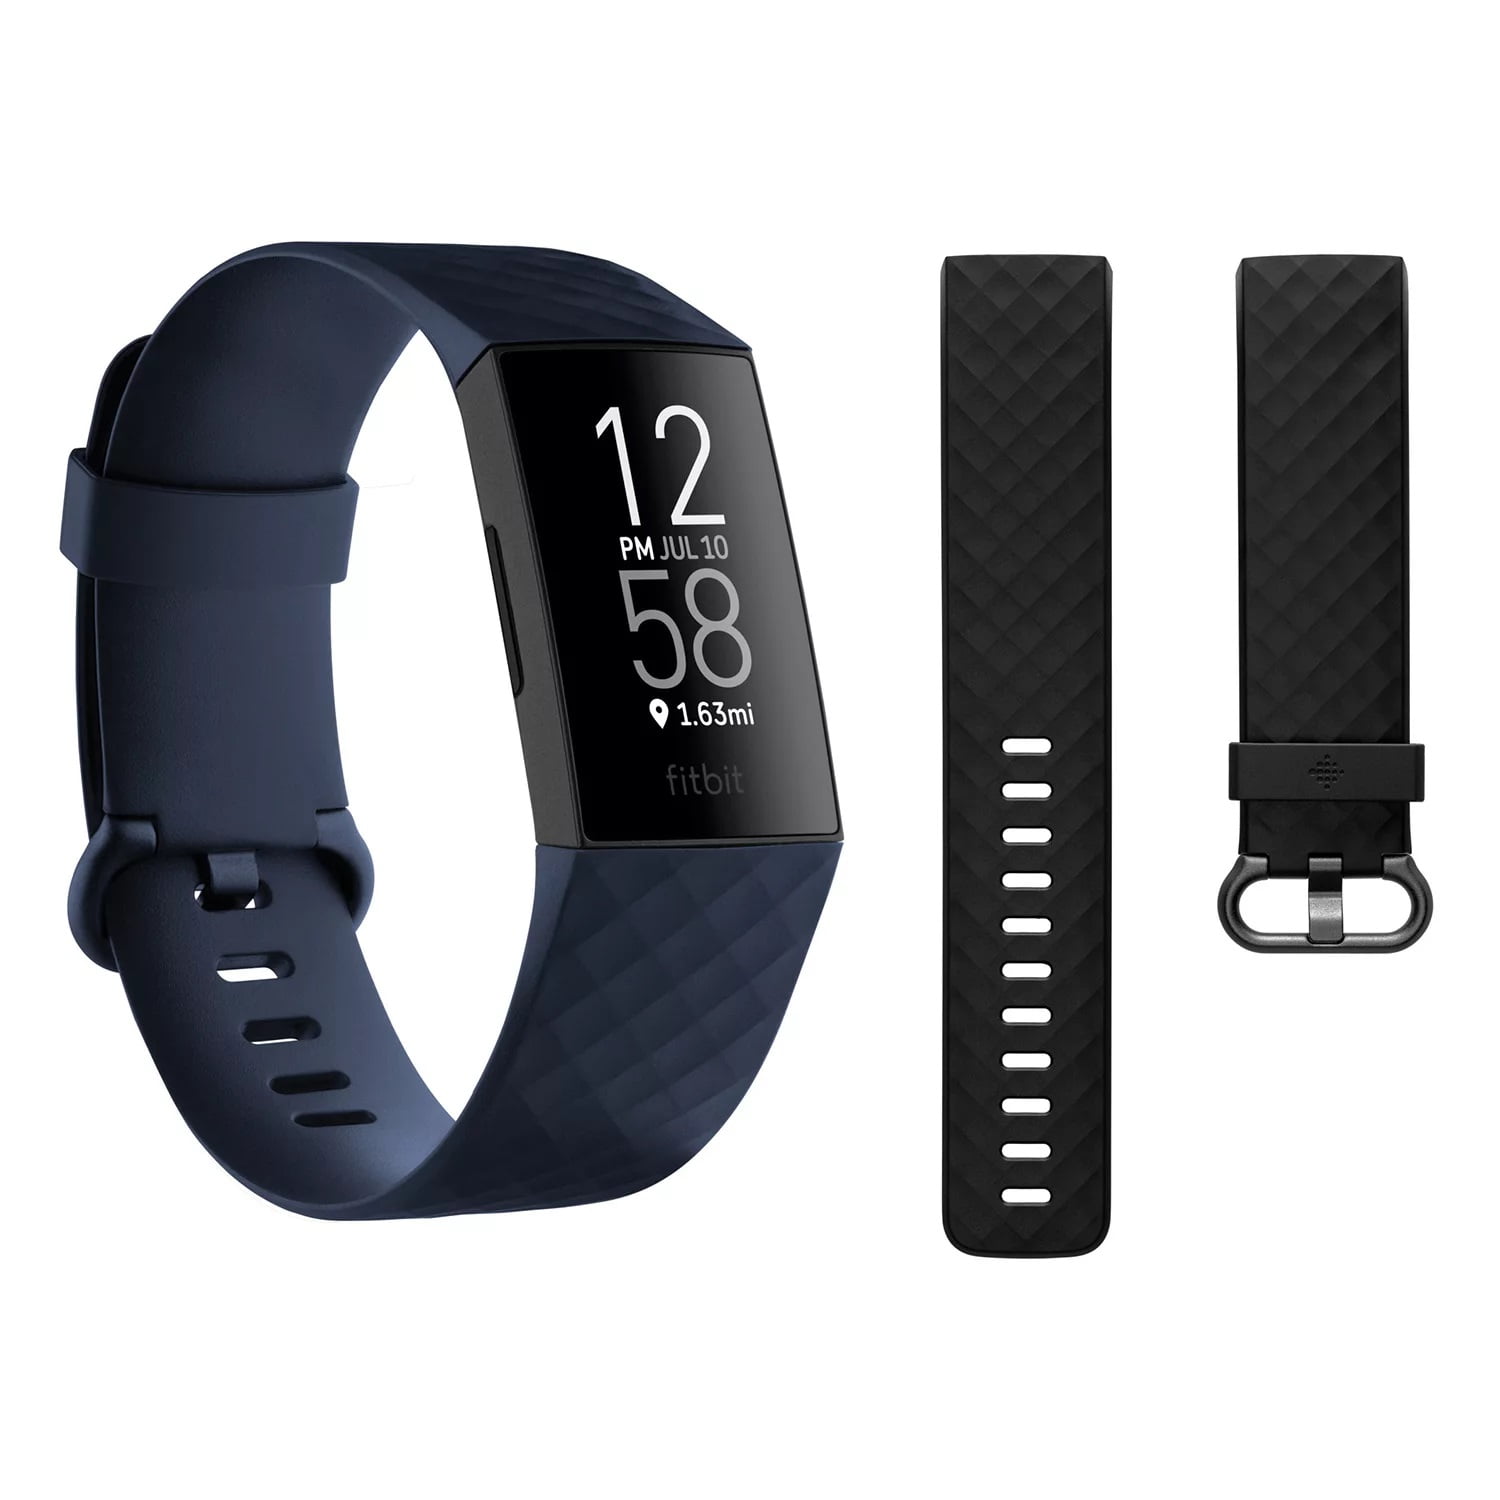 Swim Proof Built-In GPS Touchscreen Fitbit Charge 4 Fitness Activity Tracker 